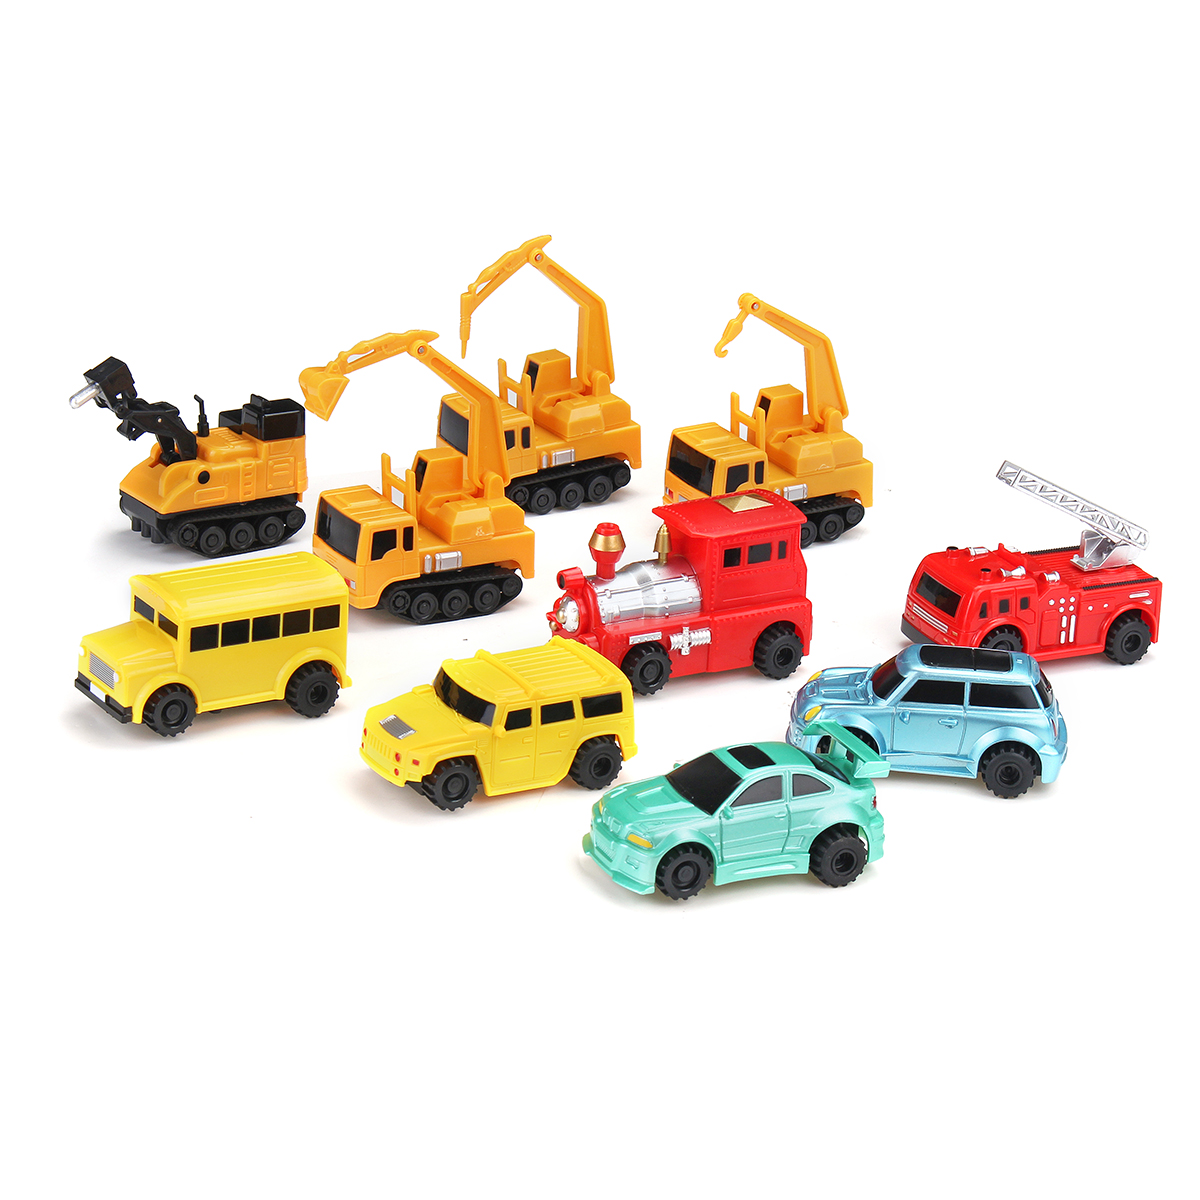 Scribing-Induction-Car-Creative-Follow-Any-Drawn-Line-Pen-Inductive-Cute-Diecast-Model-for-Children--1621624-5